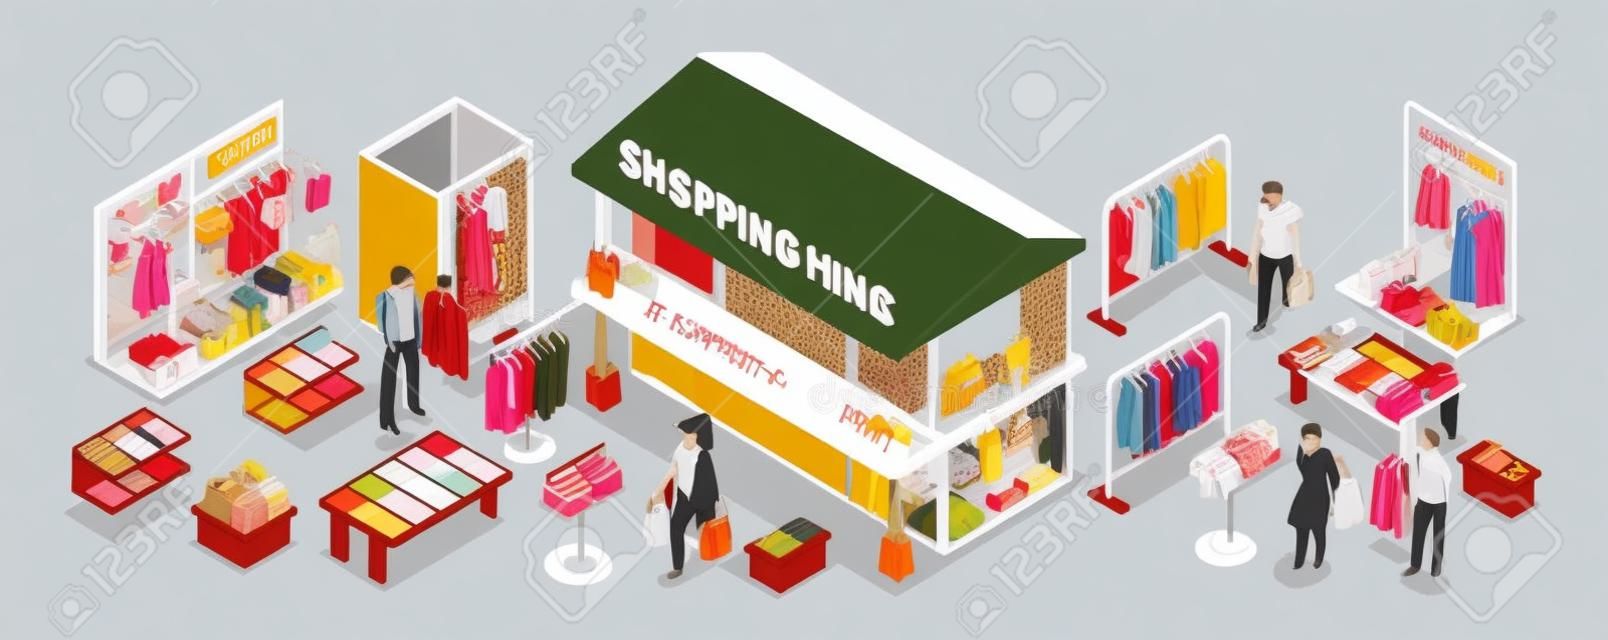 Clothing department store isometric  horizontal composition with shopping mall building fitting room display stands customers vector illustration